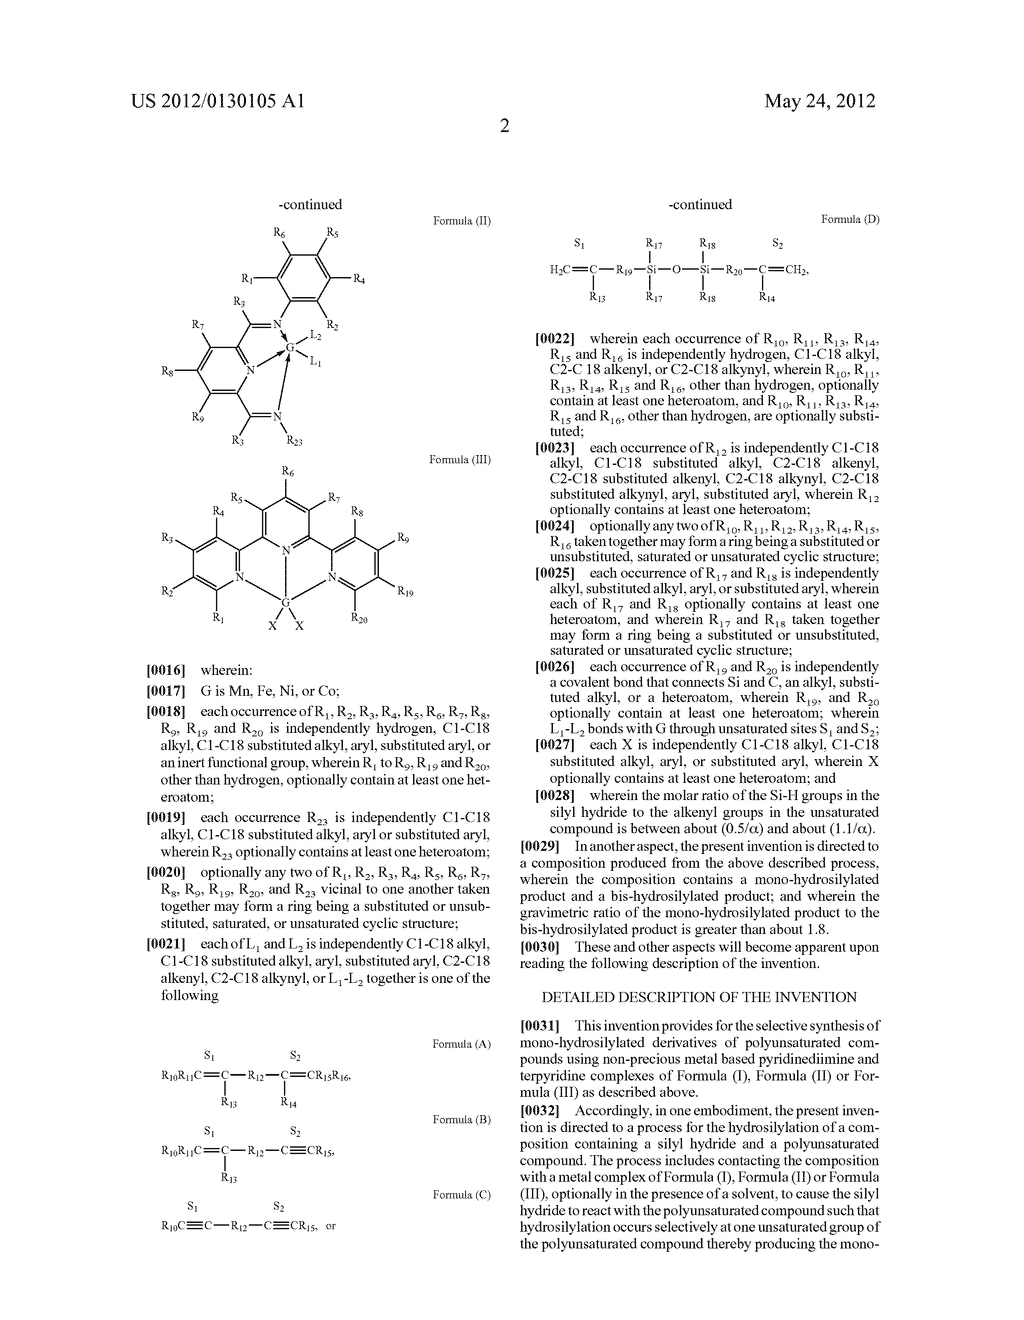 SELECTIVE NON-PRECIOUS METAL-CATALYZED MONO-HYDROSILYLATION OF     POLYUNSATURATED COMPOUNDS - diagram, schematic, and image 03